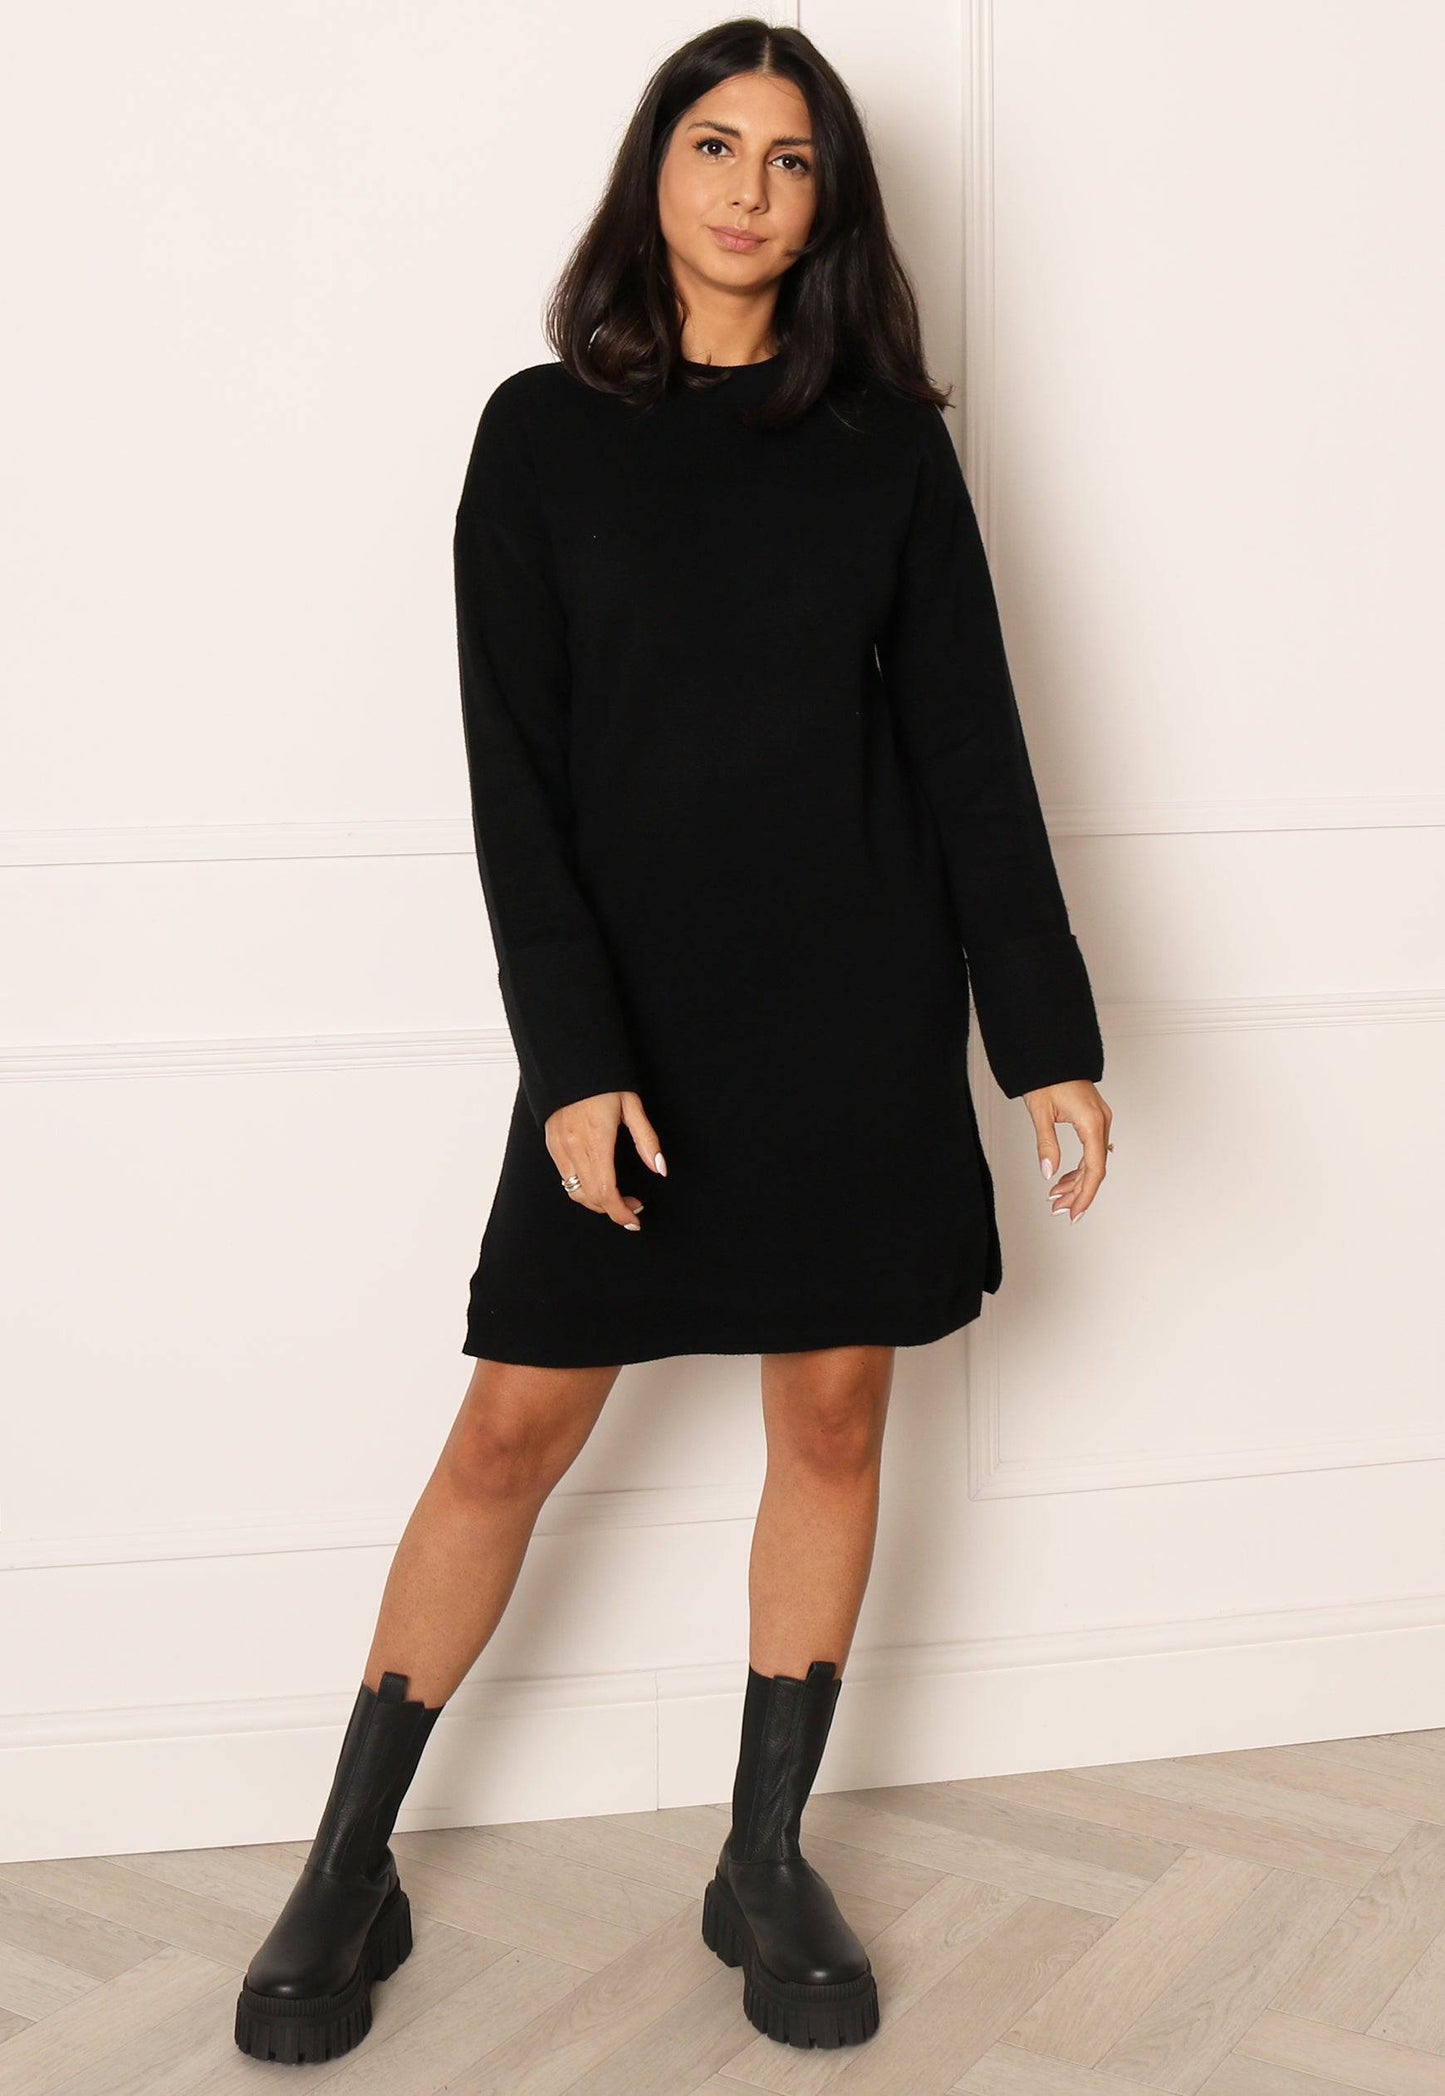 VERO MODA Gold Soft Knit Jumper Dress with side Splits in Black - One Nation Clothing